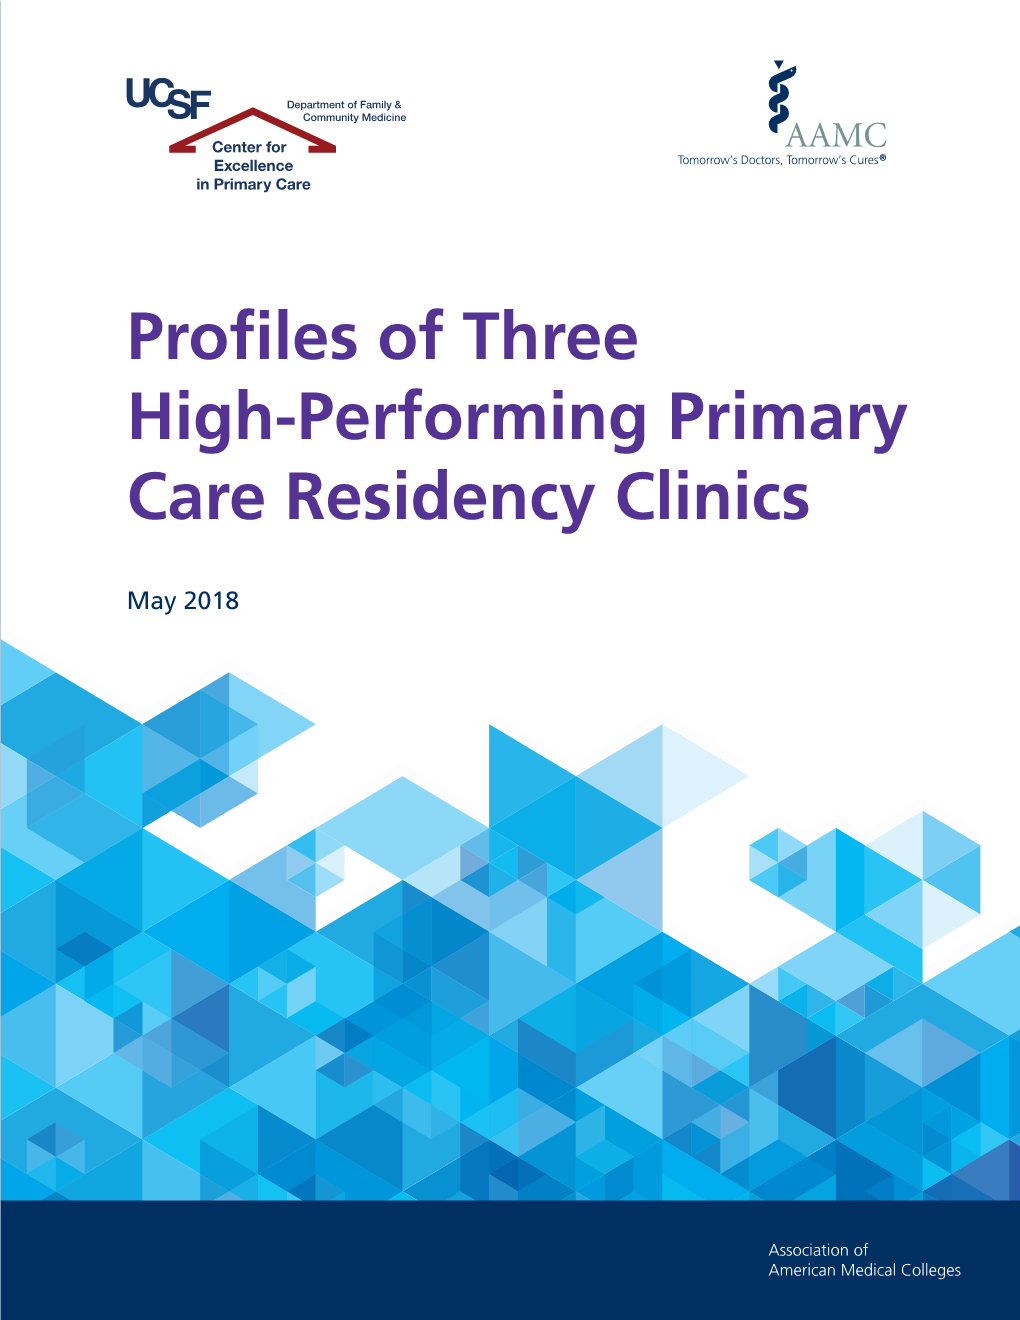 Profiles of Three High-Performing Primary Care Residency Clinics